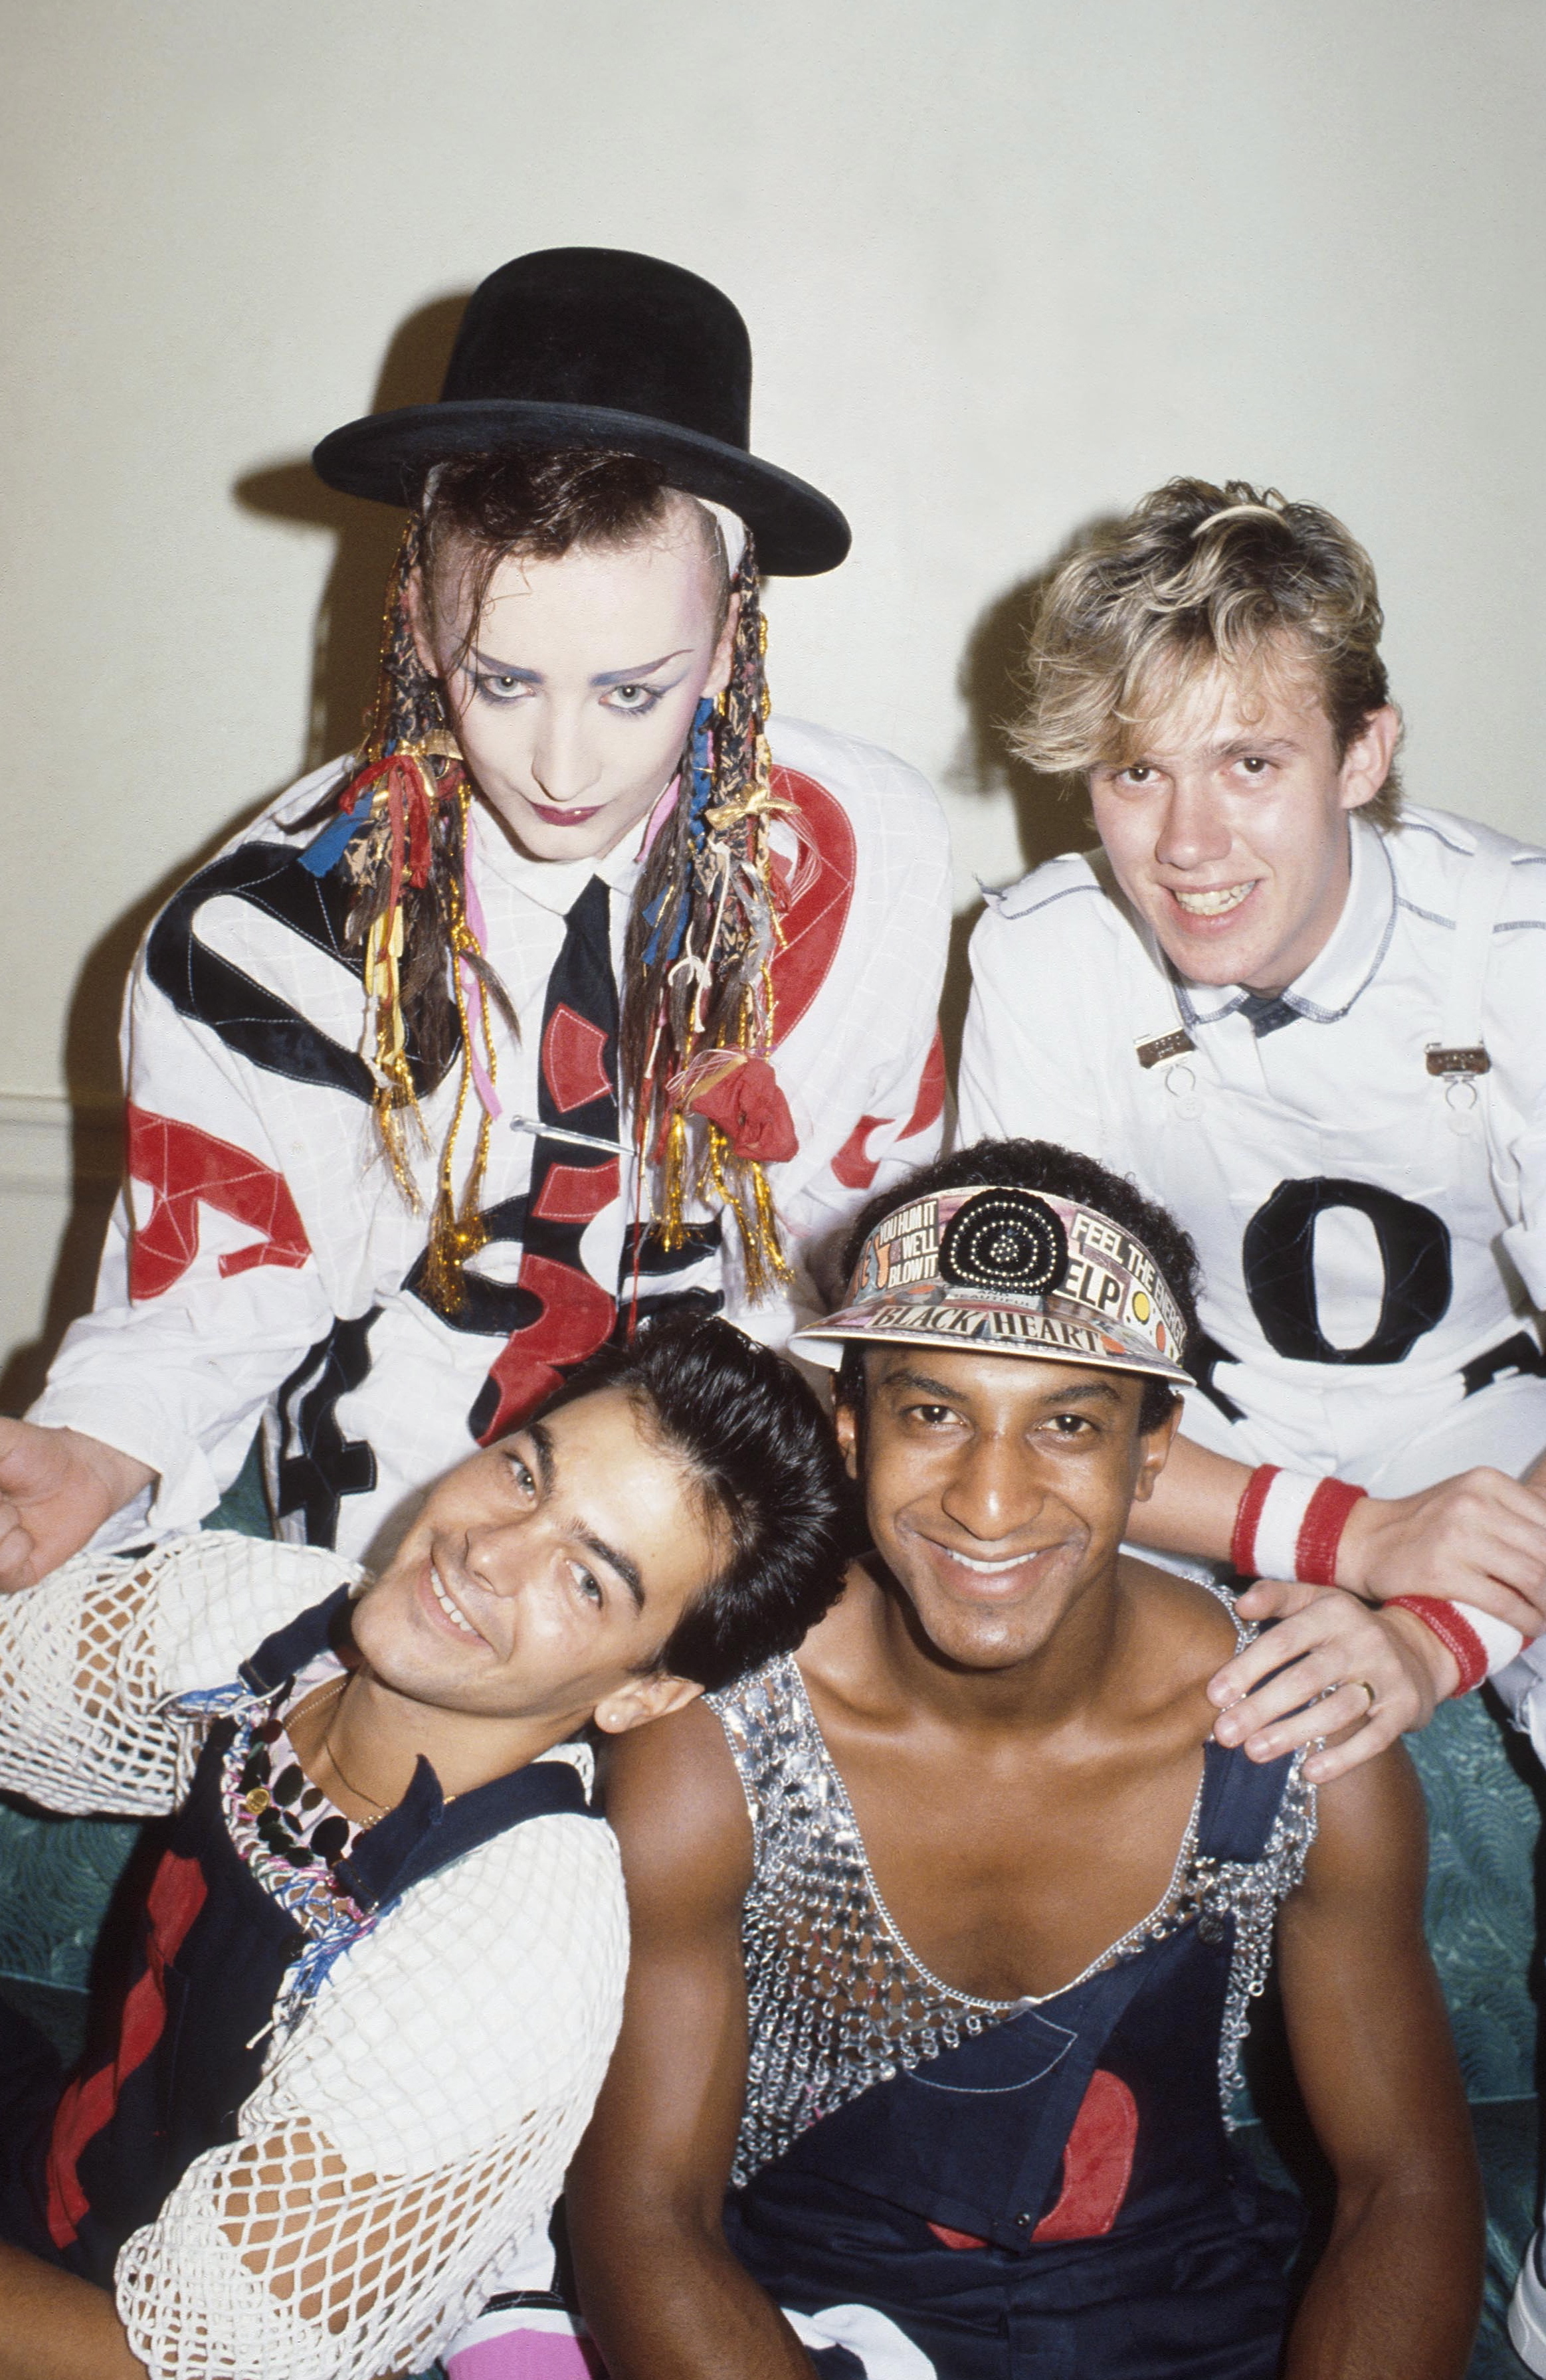 Boy George found fame in the 80s band Culture Club